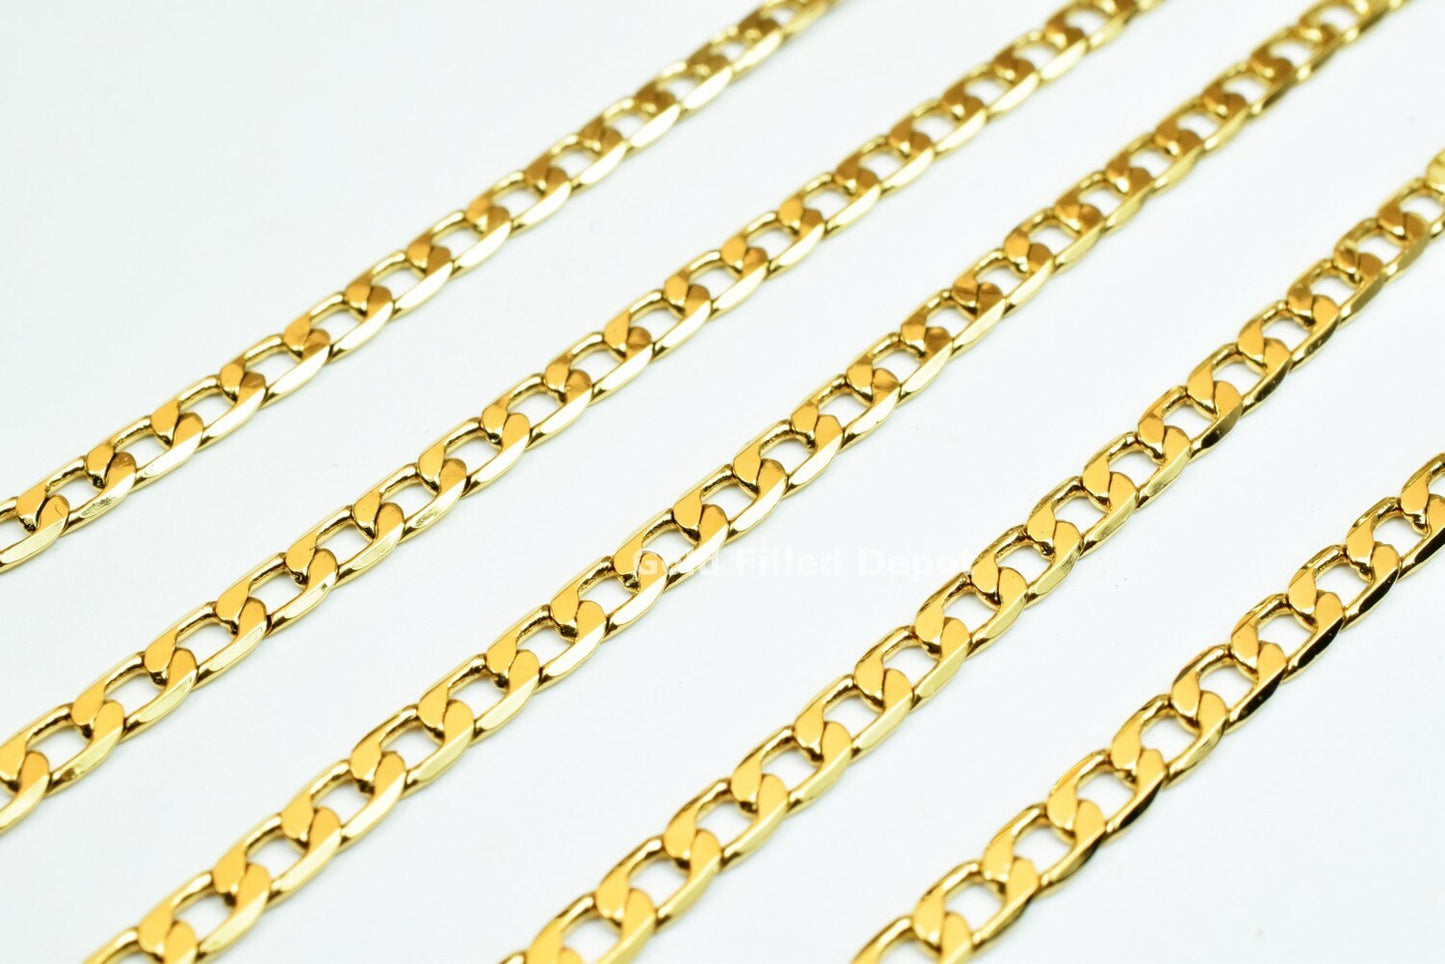 3 Feet 18K Gold Filled Chain Cuban Link Chain, Cable Chain Width 3mm Thickness 0.5mm Gold Filled Finding Chain For Jewelry Making GFC044